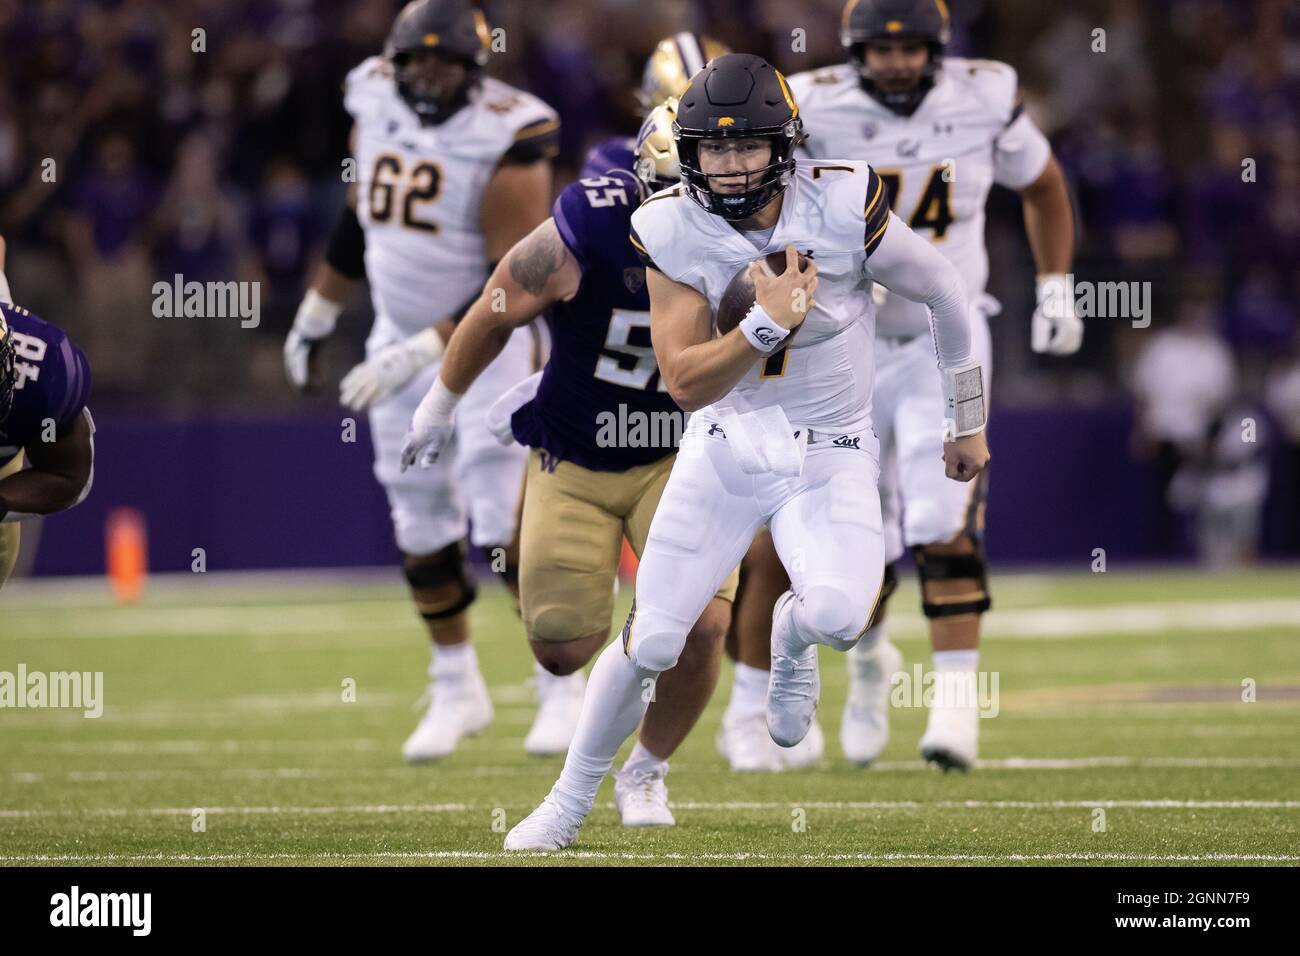 California Golden Bears quarterback Chase Garbers (7) scrambles up the field during the 4th quarter of an NCAA college football game against the Washi Stock Photo